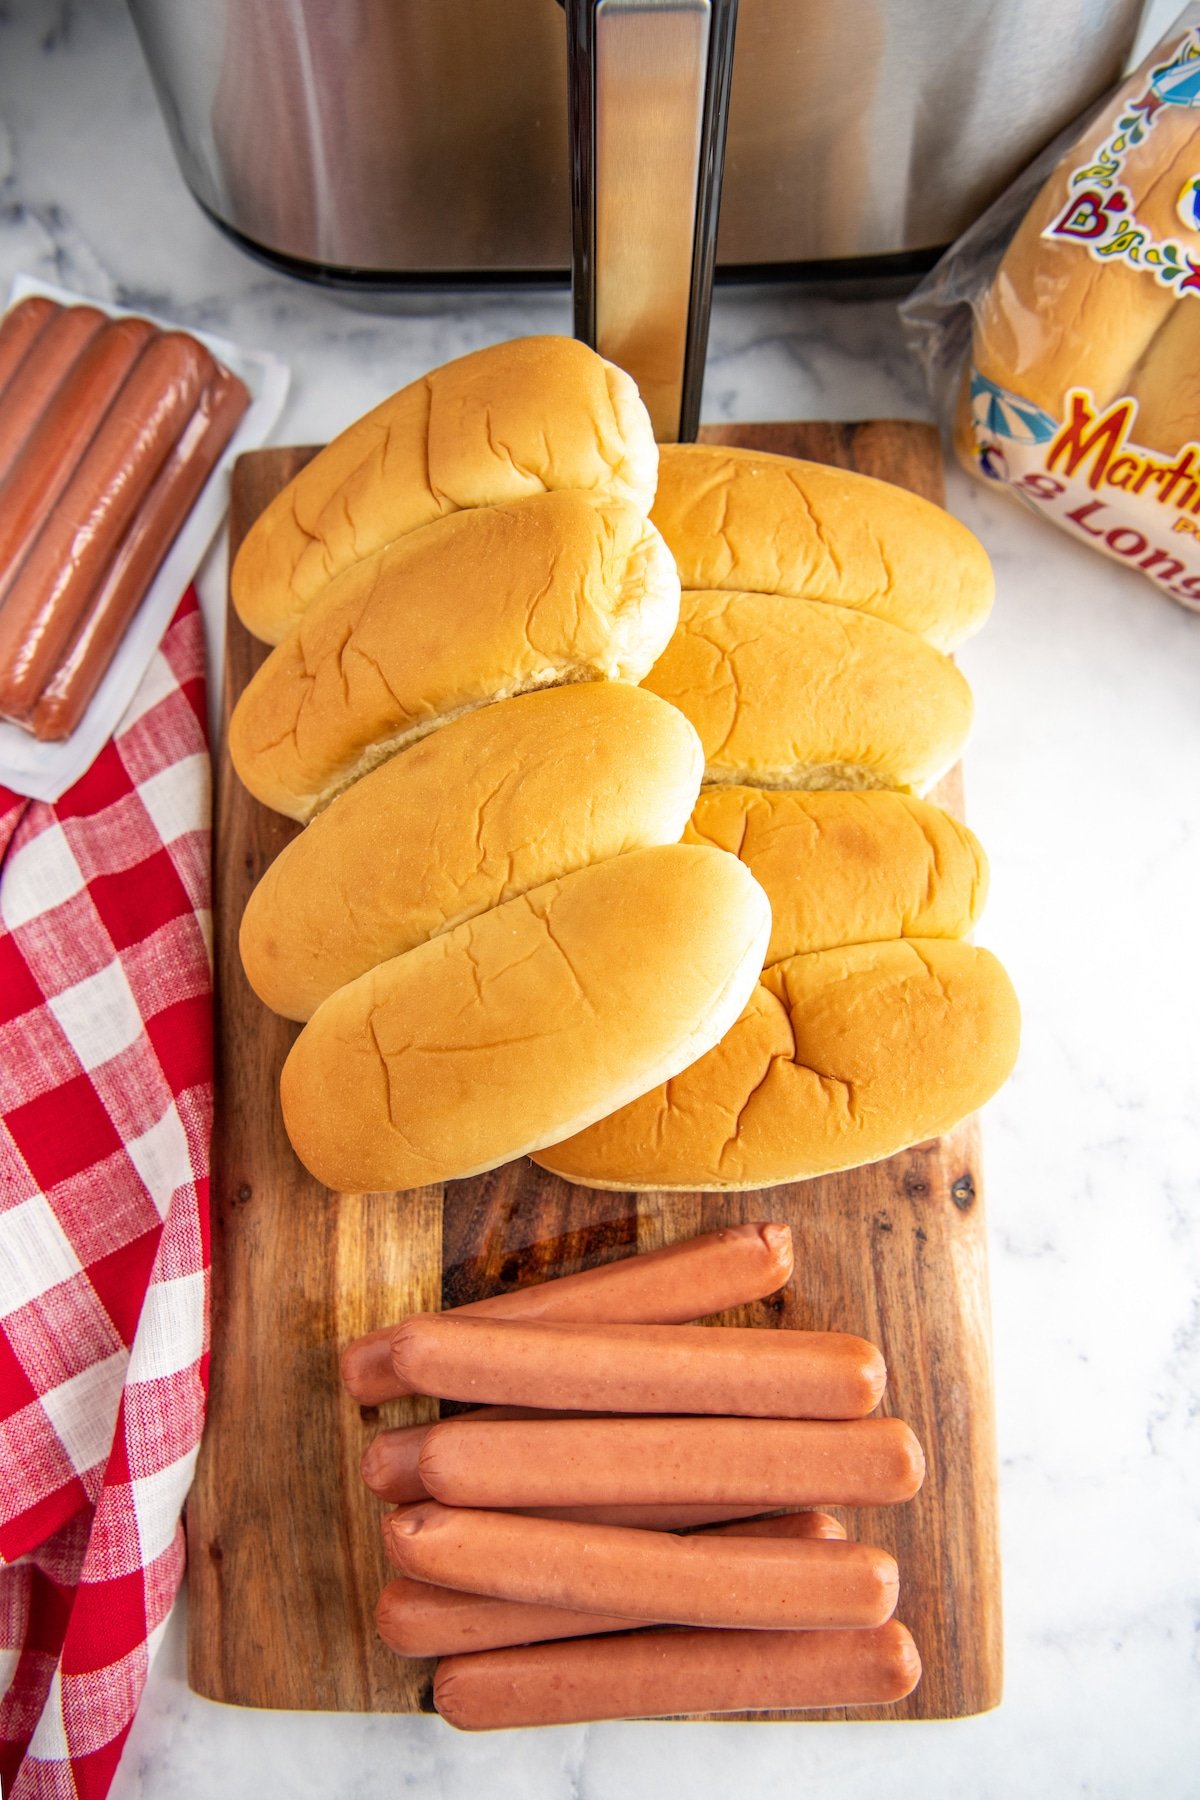 Hot dogs and buns on a cutting board with air fryer in background.